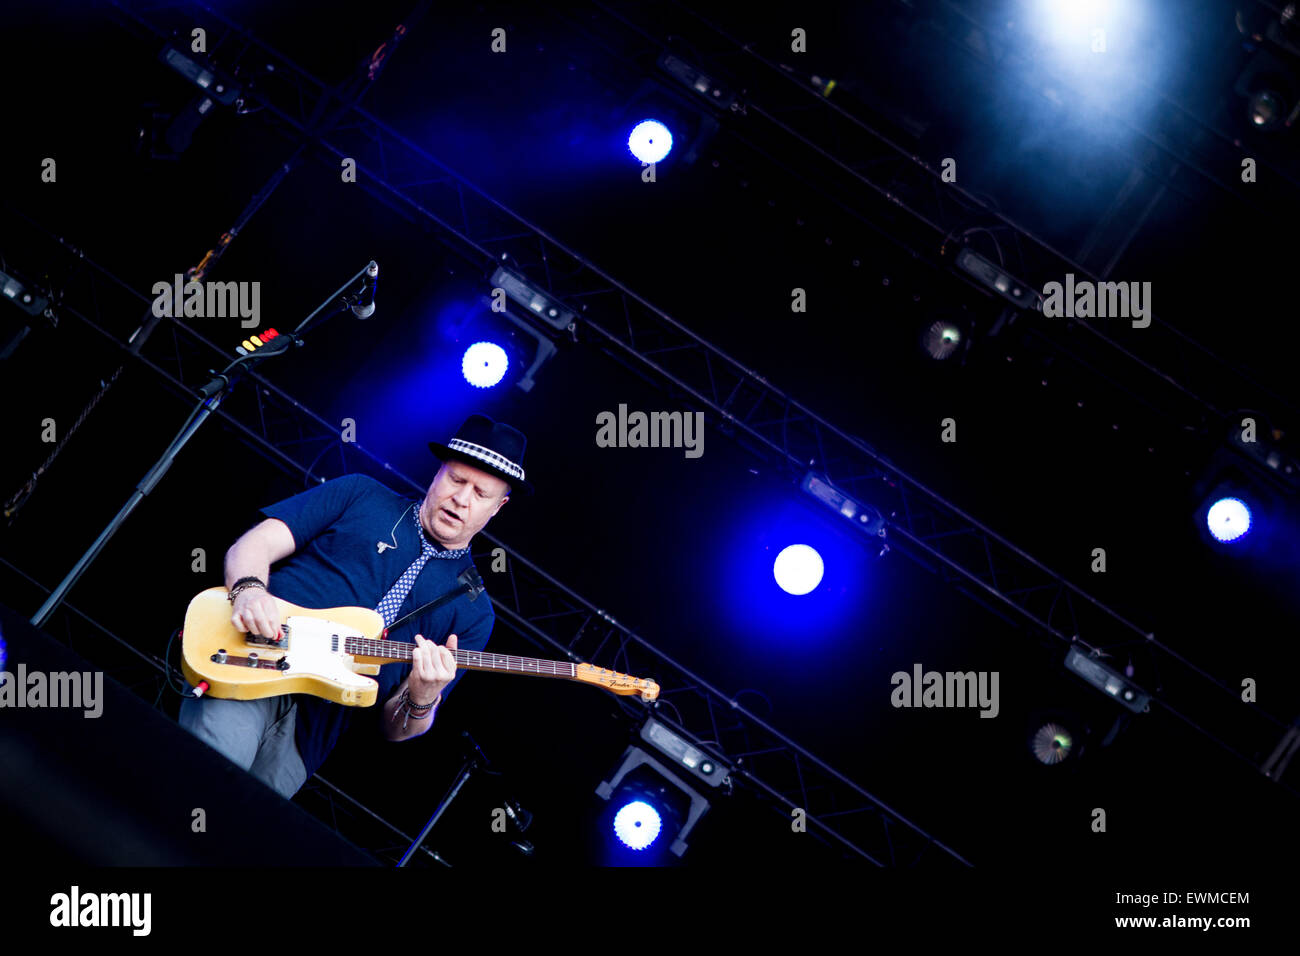 David Bryson of the american alternative rock band Counting Crows pictured on stage as they perform live at day 3 of Pinkpop Fes Stock Photo